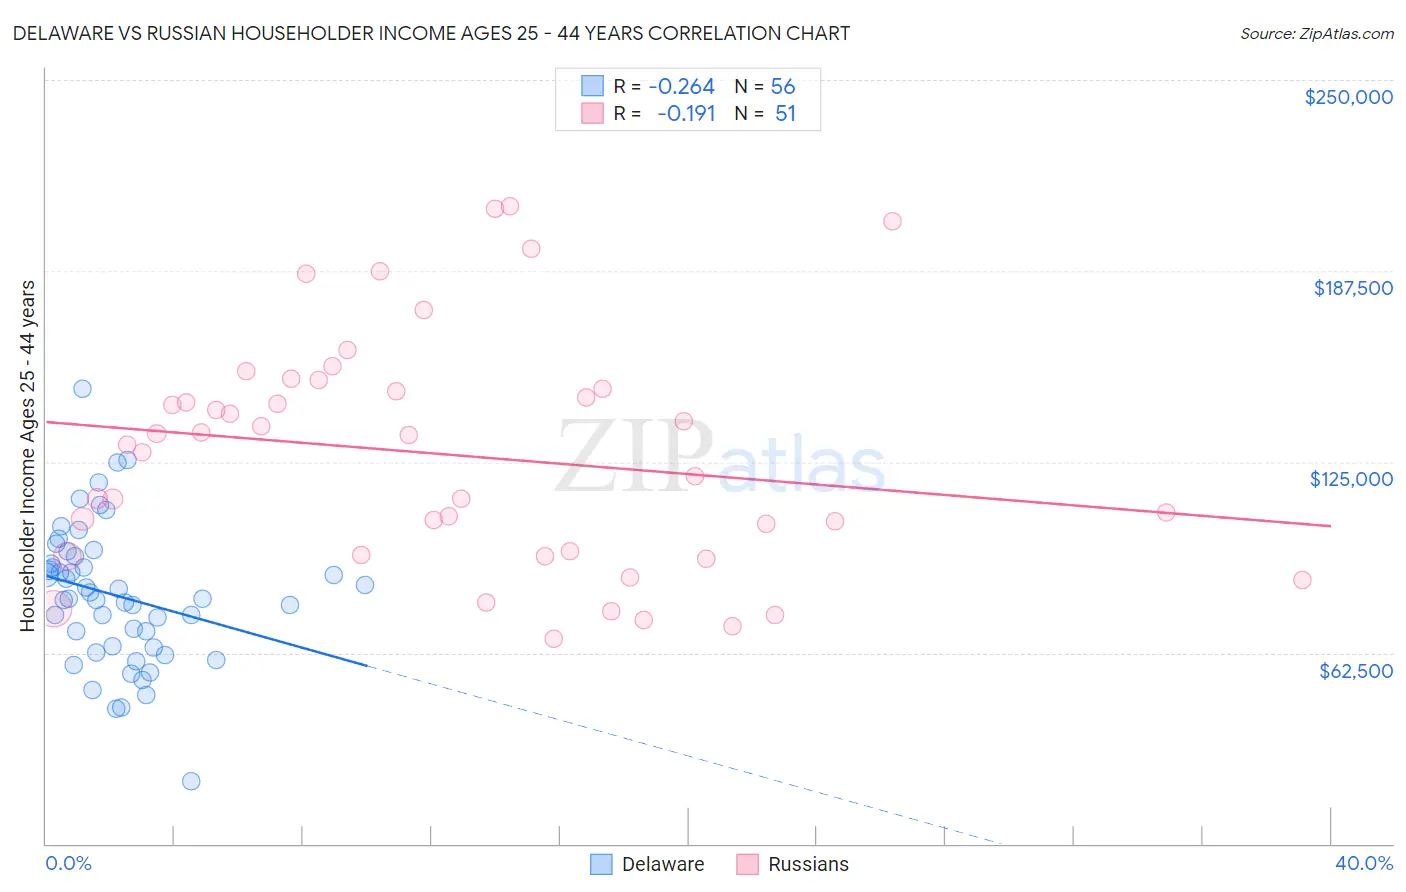 Delaware vs Russian Householder Income Ages 25 - 44 years